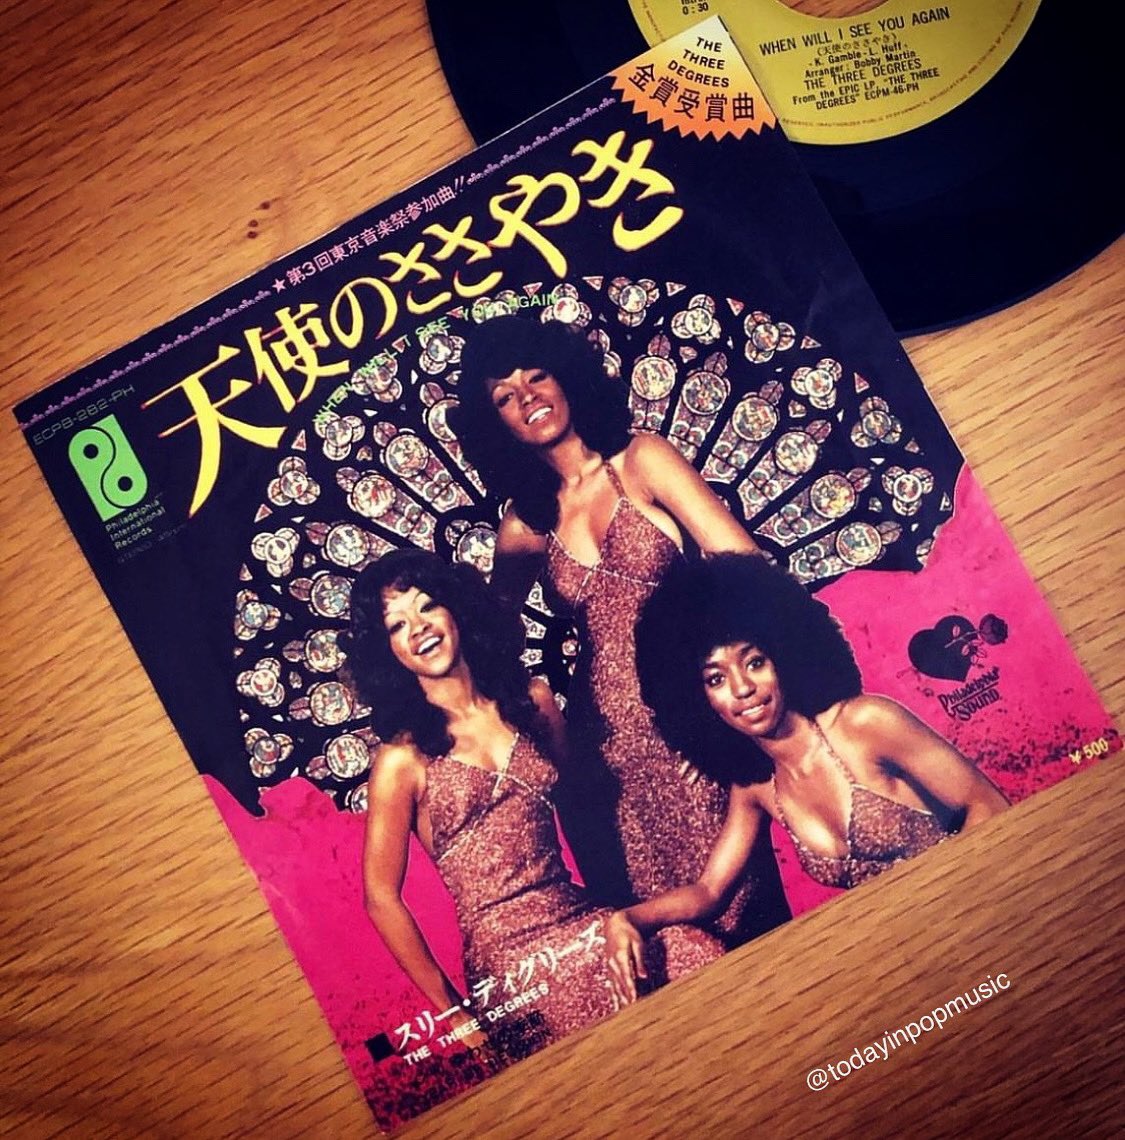 For the week ending December 14, 1974, The Three Degrees peaked at #2 on the #billboardhot100 chart with When Will I See You Again.

#thethreedegrees #threedegrees #whenwilliseeyouagain #70smusic #70ssoul #todayinpopmusic #preciousmoments